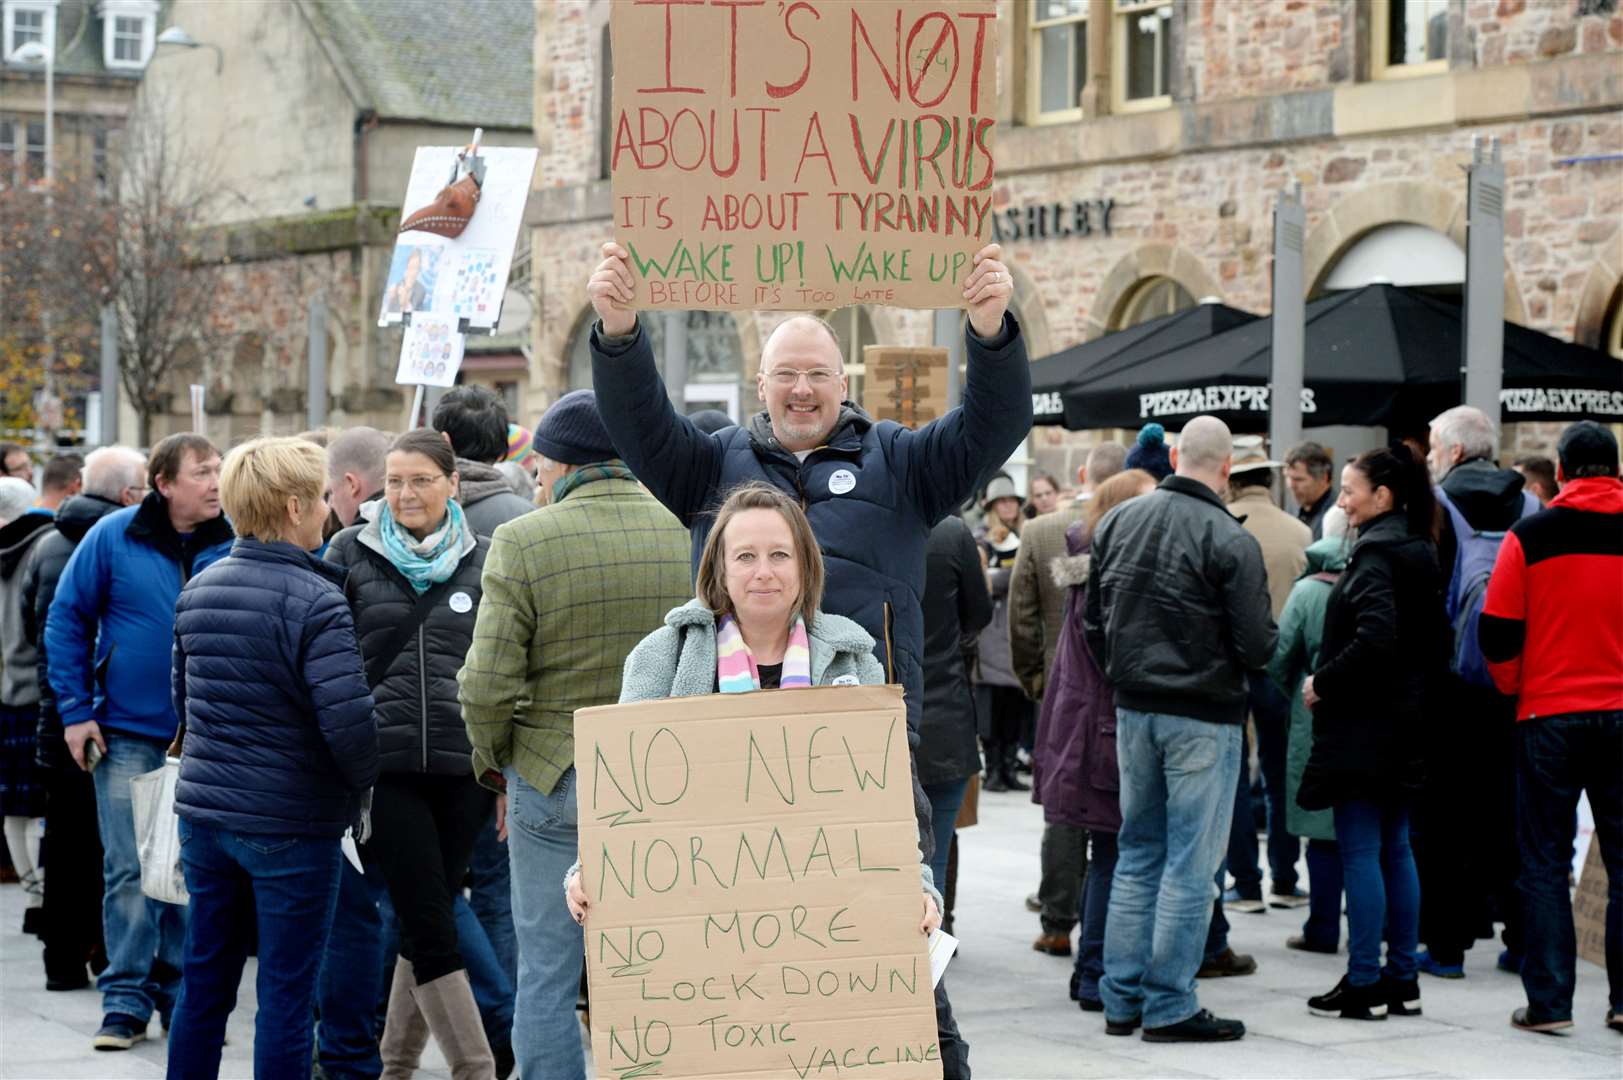 Mark and Lisa Huis were among people protesting against coronavirus restrictions.